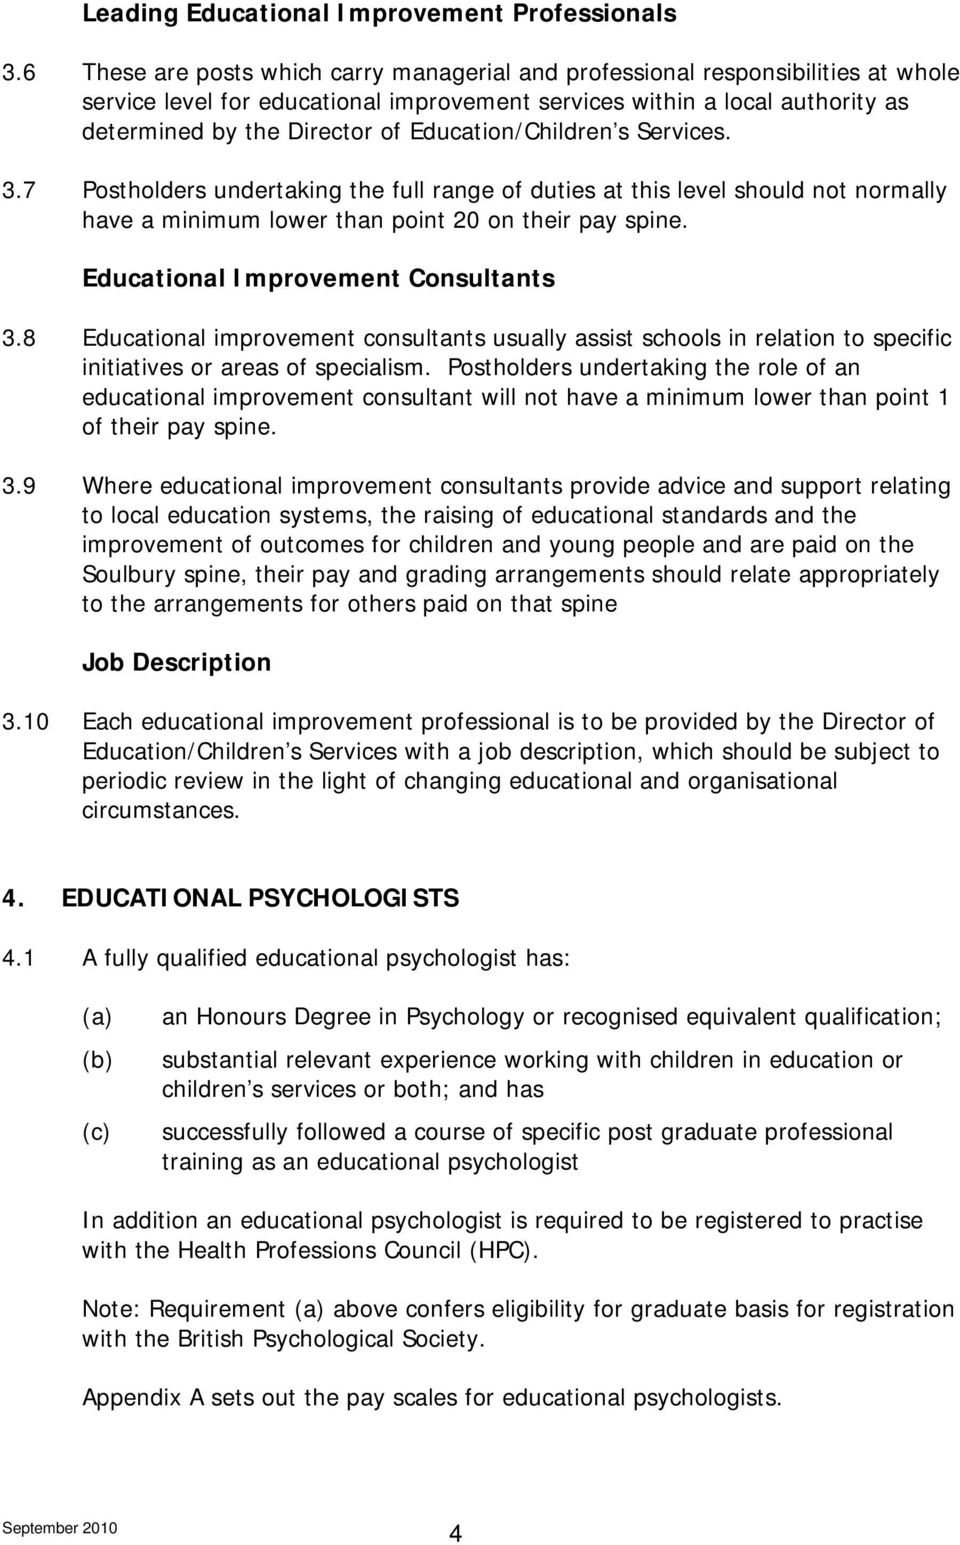 Education/Children s Services. 3.7 Postholders undertaking the full range of duties at this level should not normally have a minimum lower than point 20 on their pay spine.